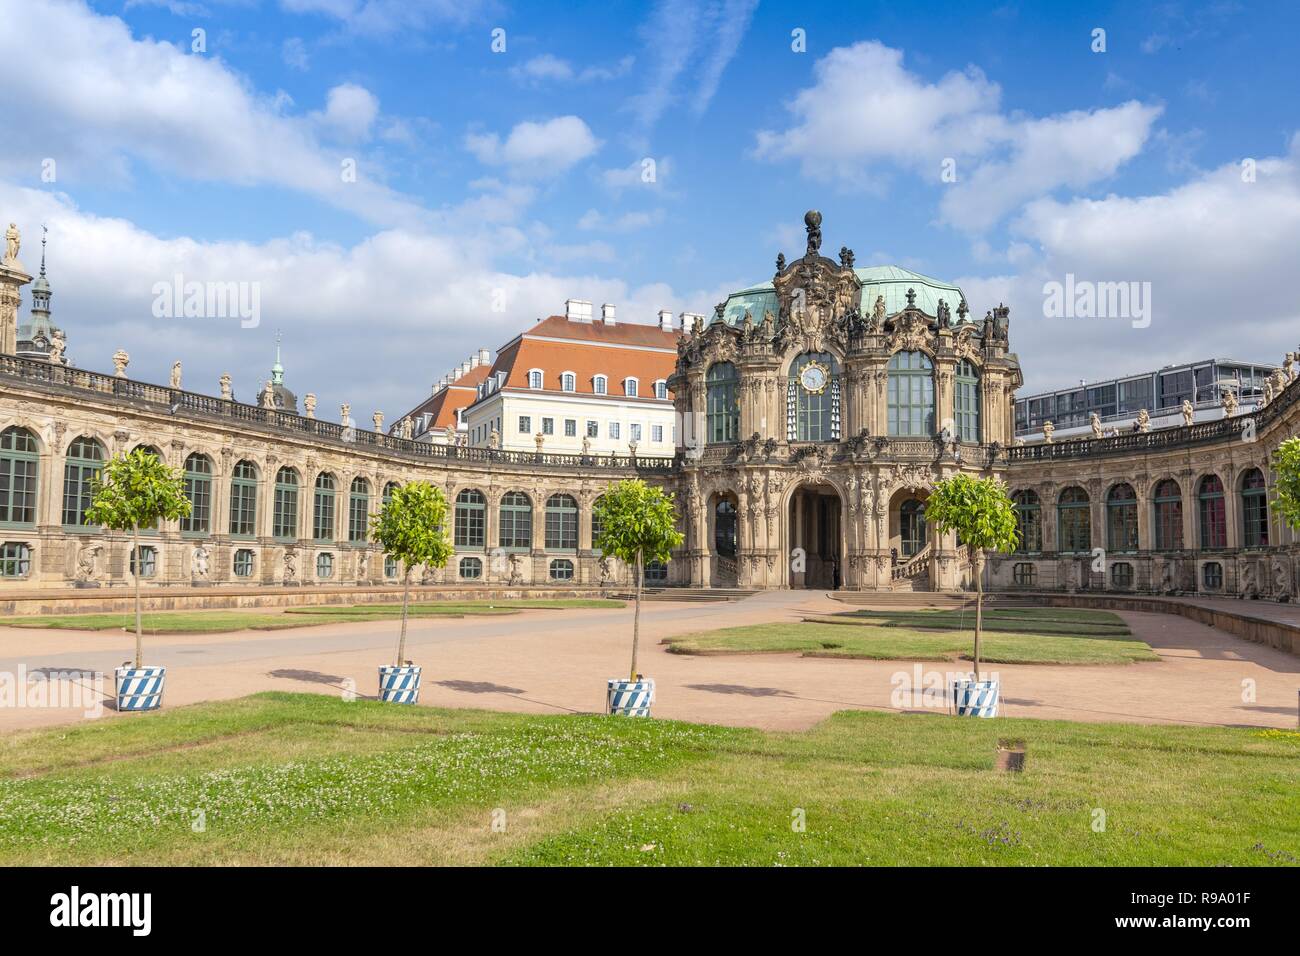 The Glockenspielpavillon (Carillon Pavilion) in the Zwinger a famous palace in Dresden, Germany. Stock Photo